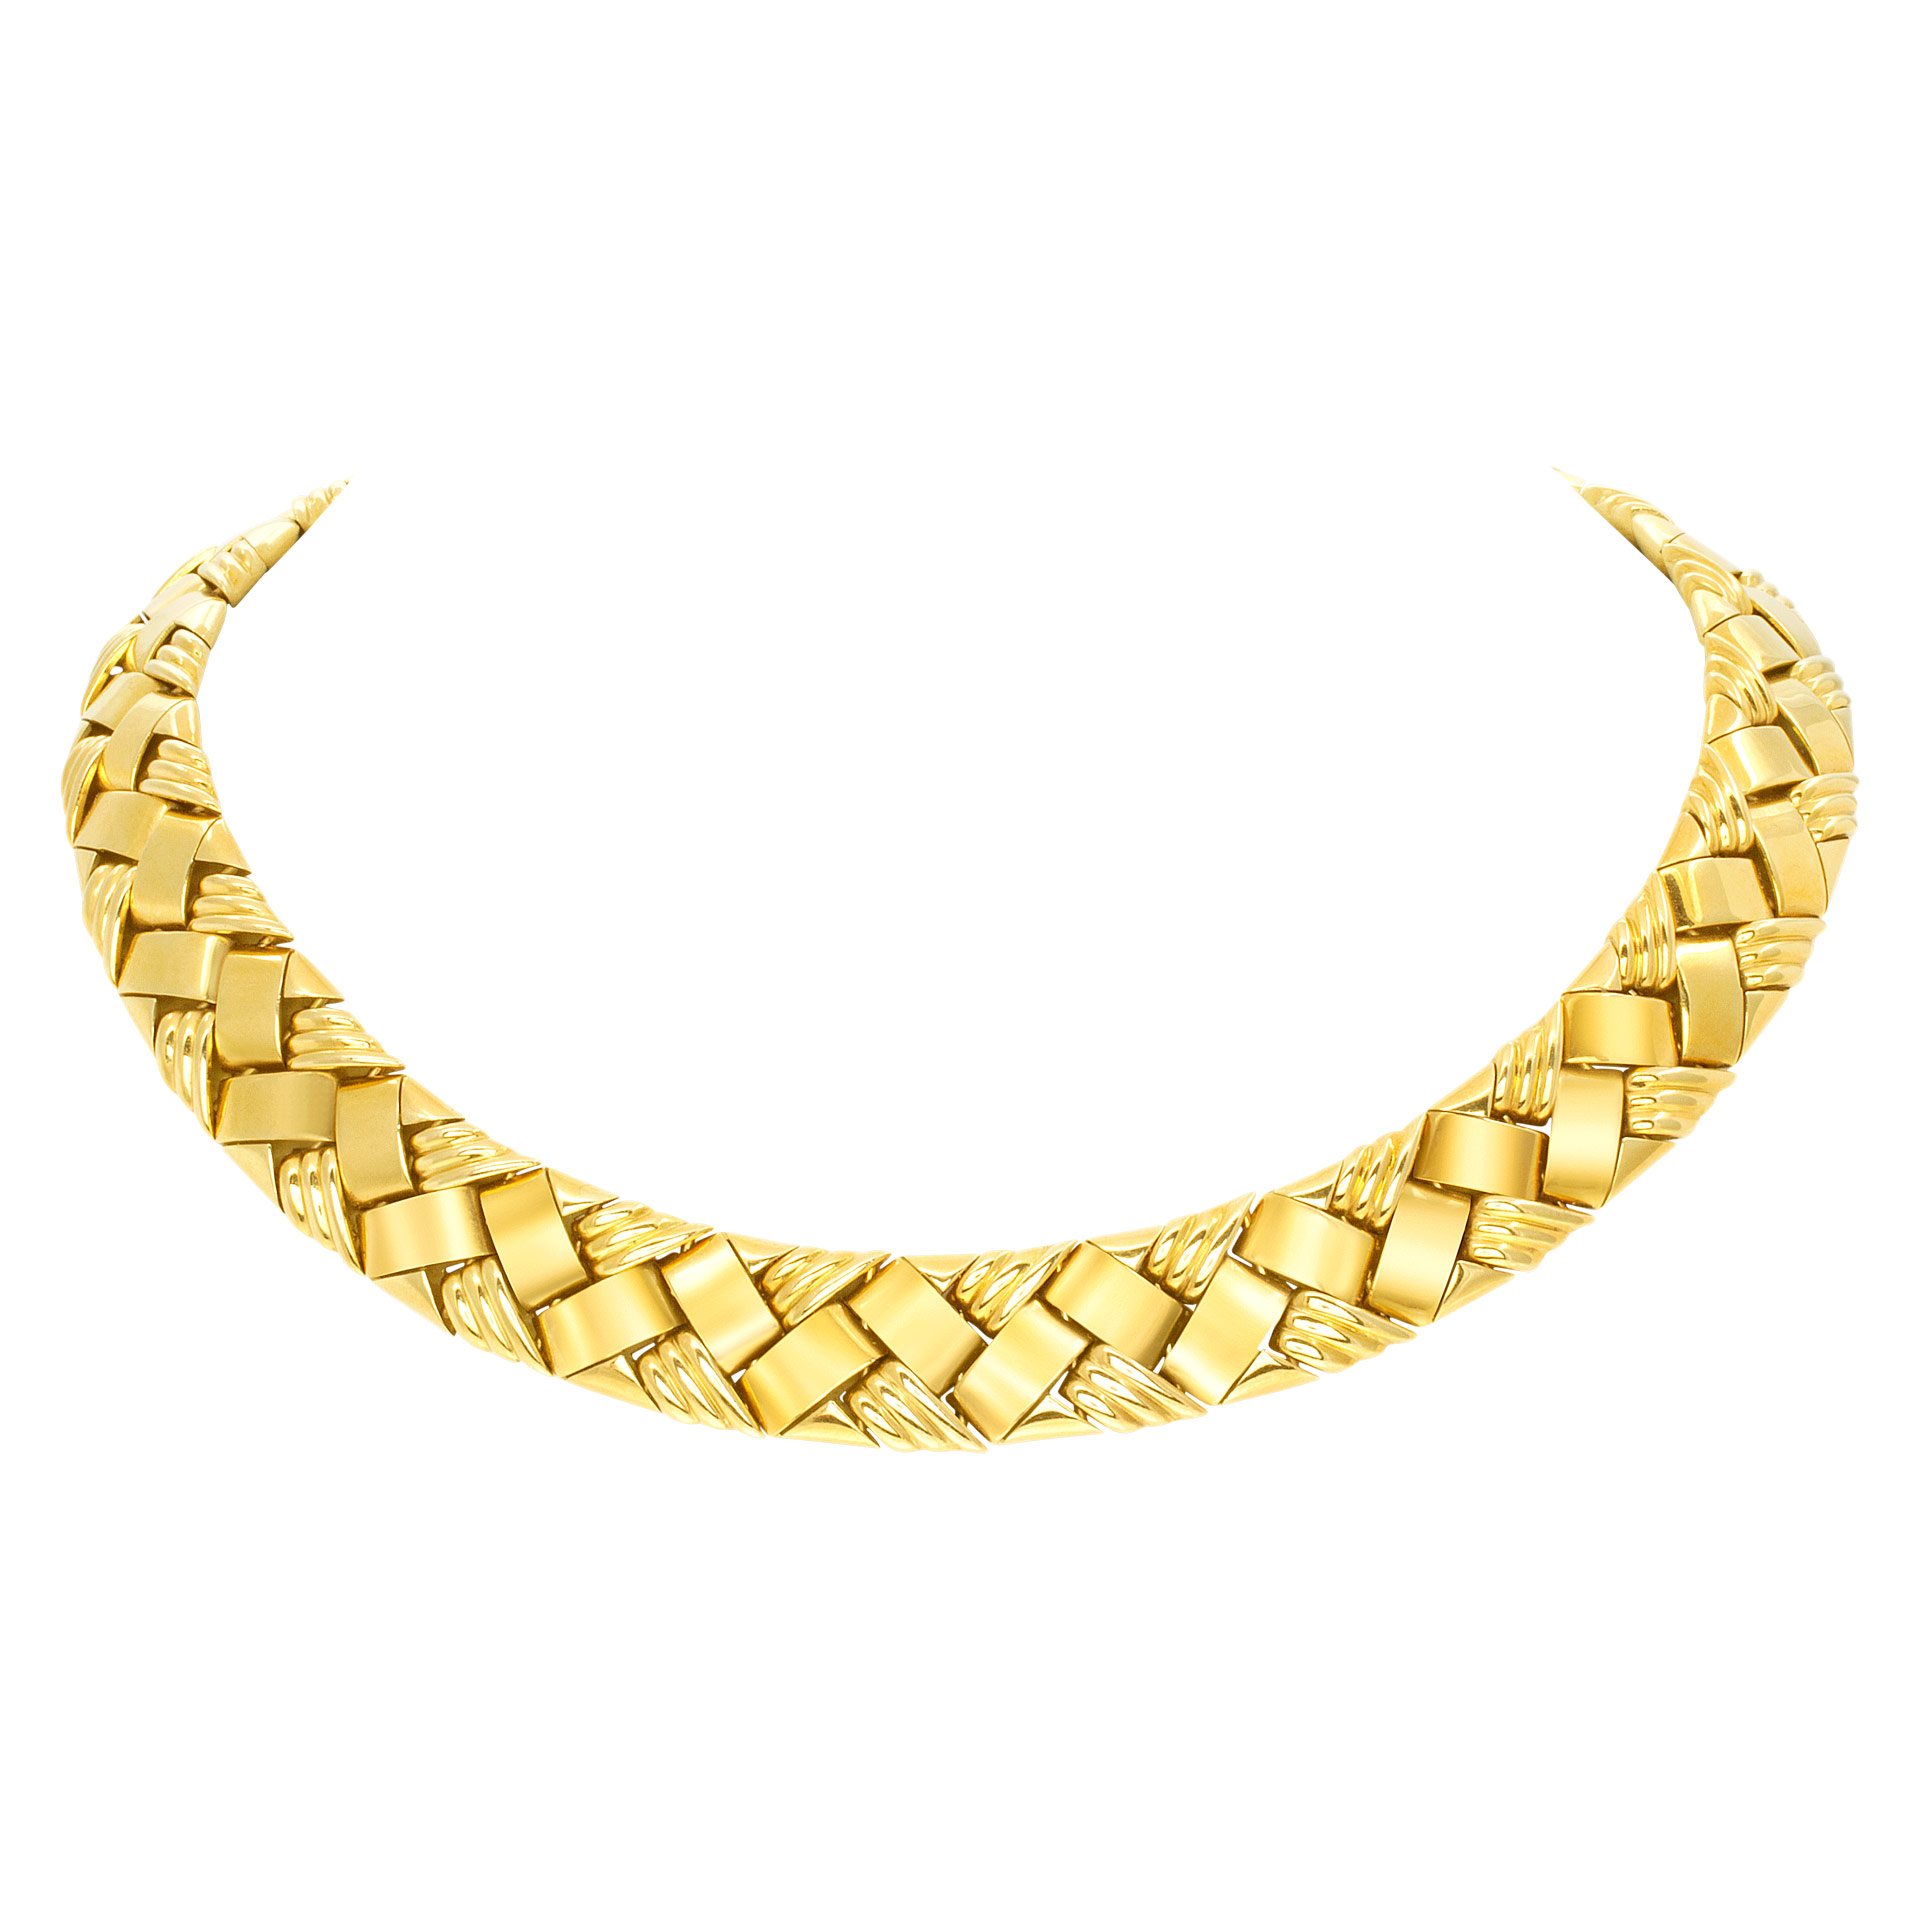 From the Synthesis collection by reknown Milan Italian designer Piero Milano, spectacular necklace in 18K.